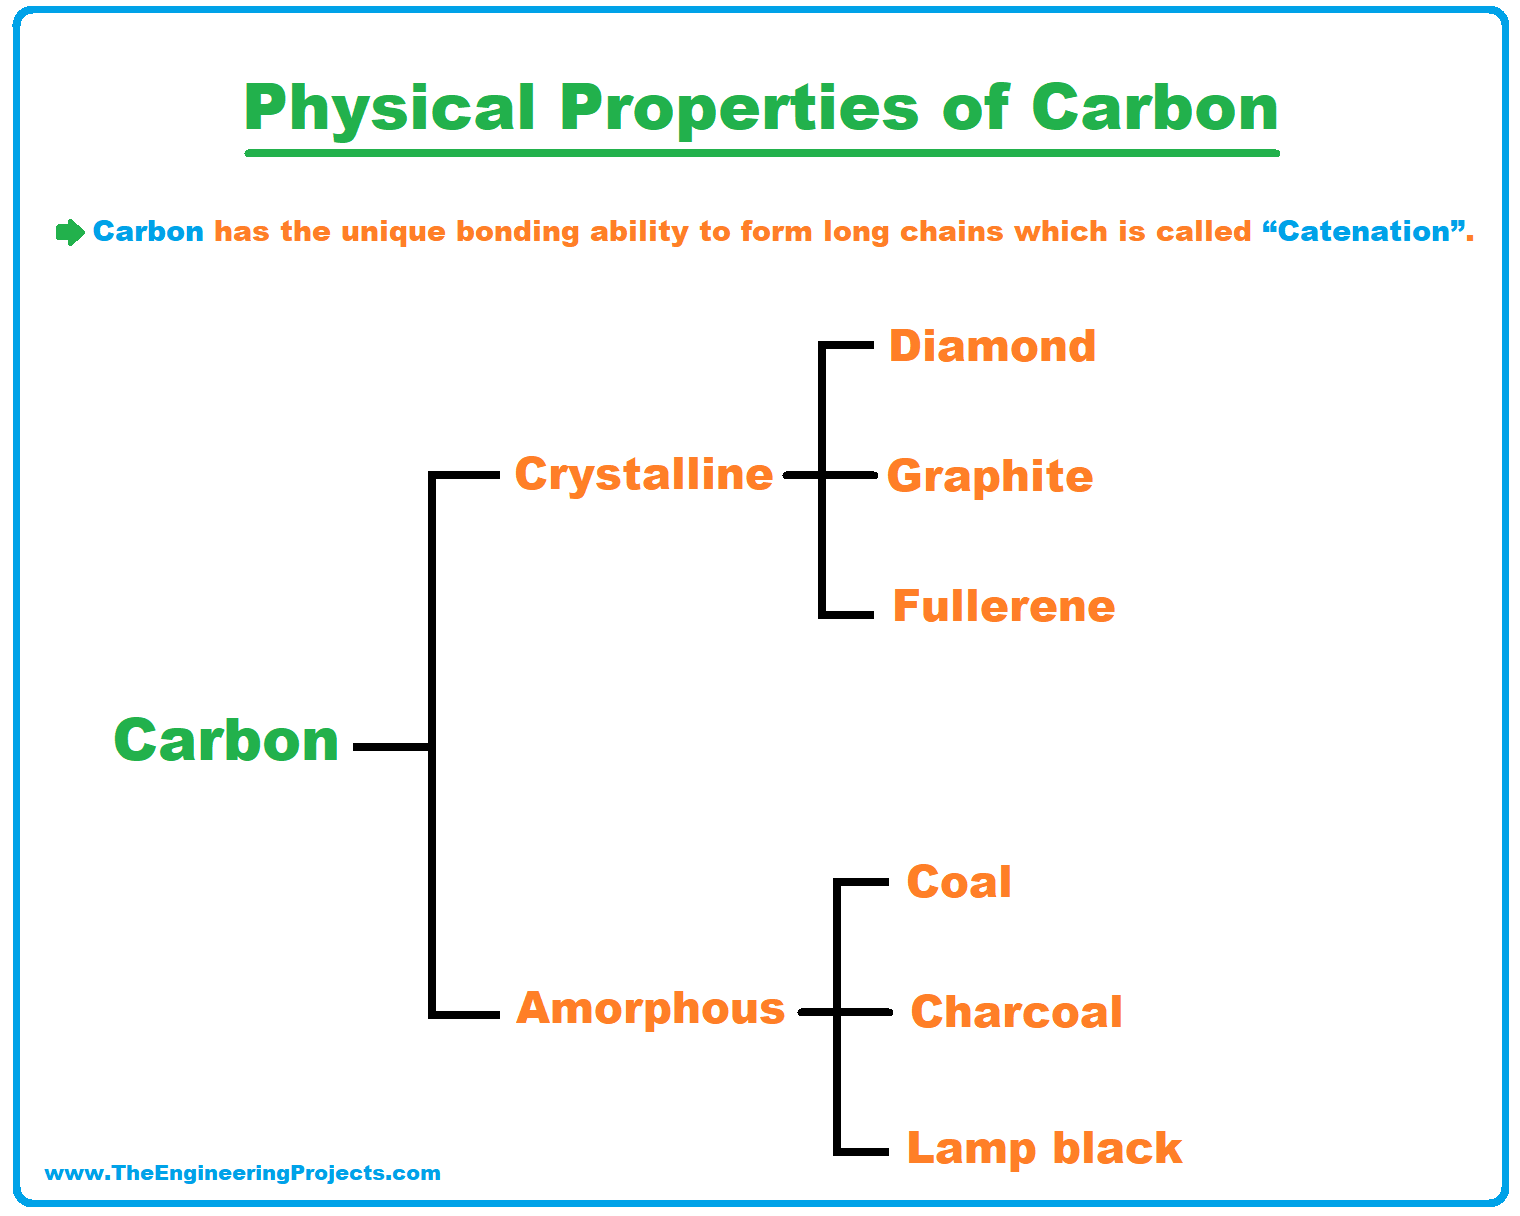 History of Periodic Table, Periodic Table, periodic table deifnition, periodic table group14, group14 of periodic table, carbon family, periodic table trends, physical properties of carbon